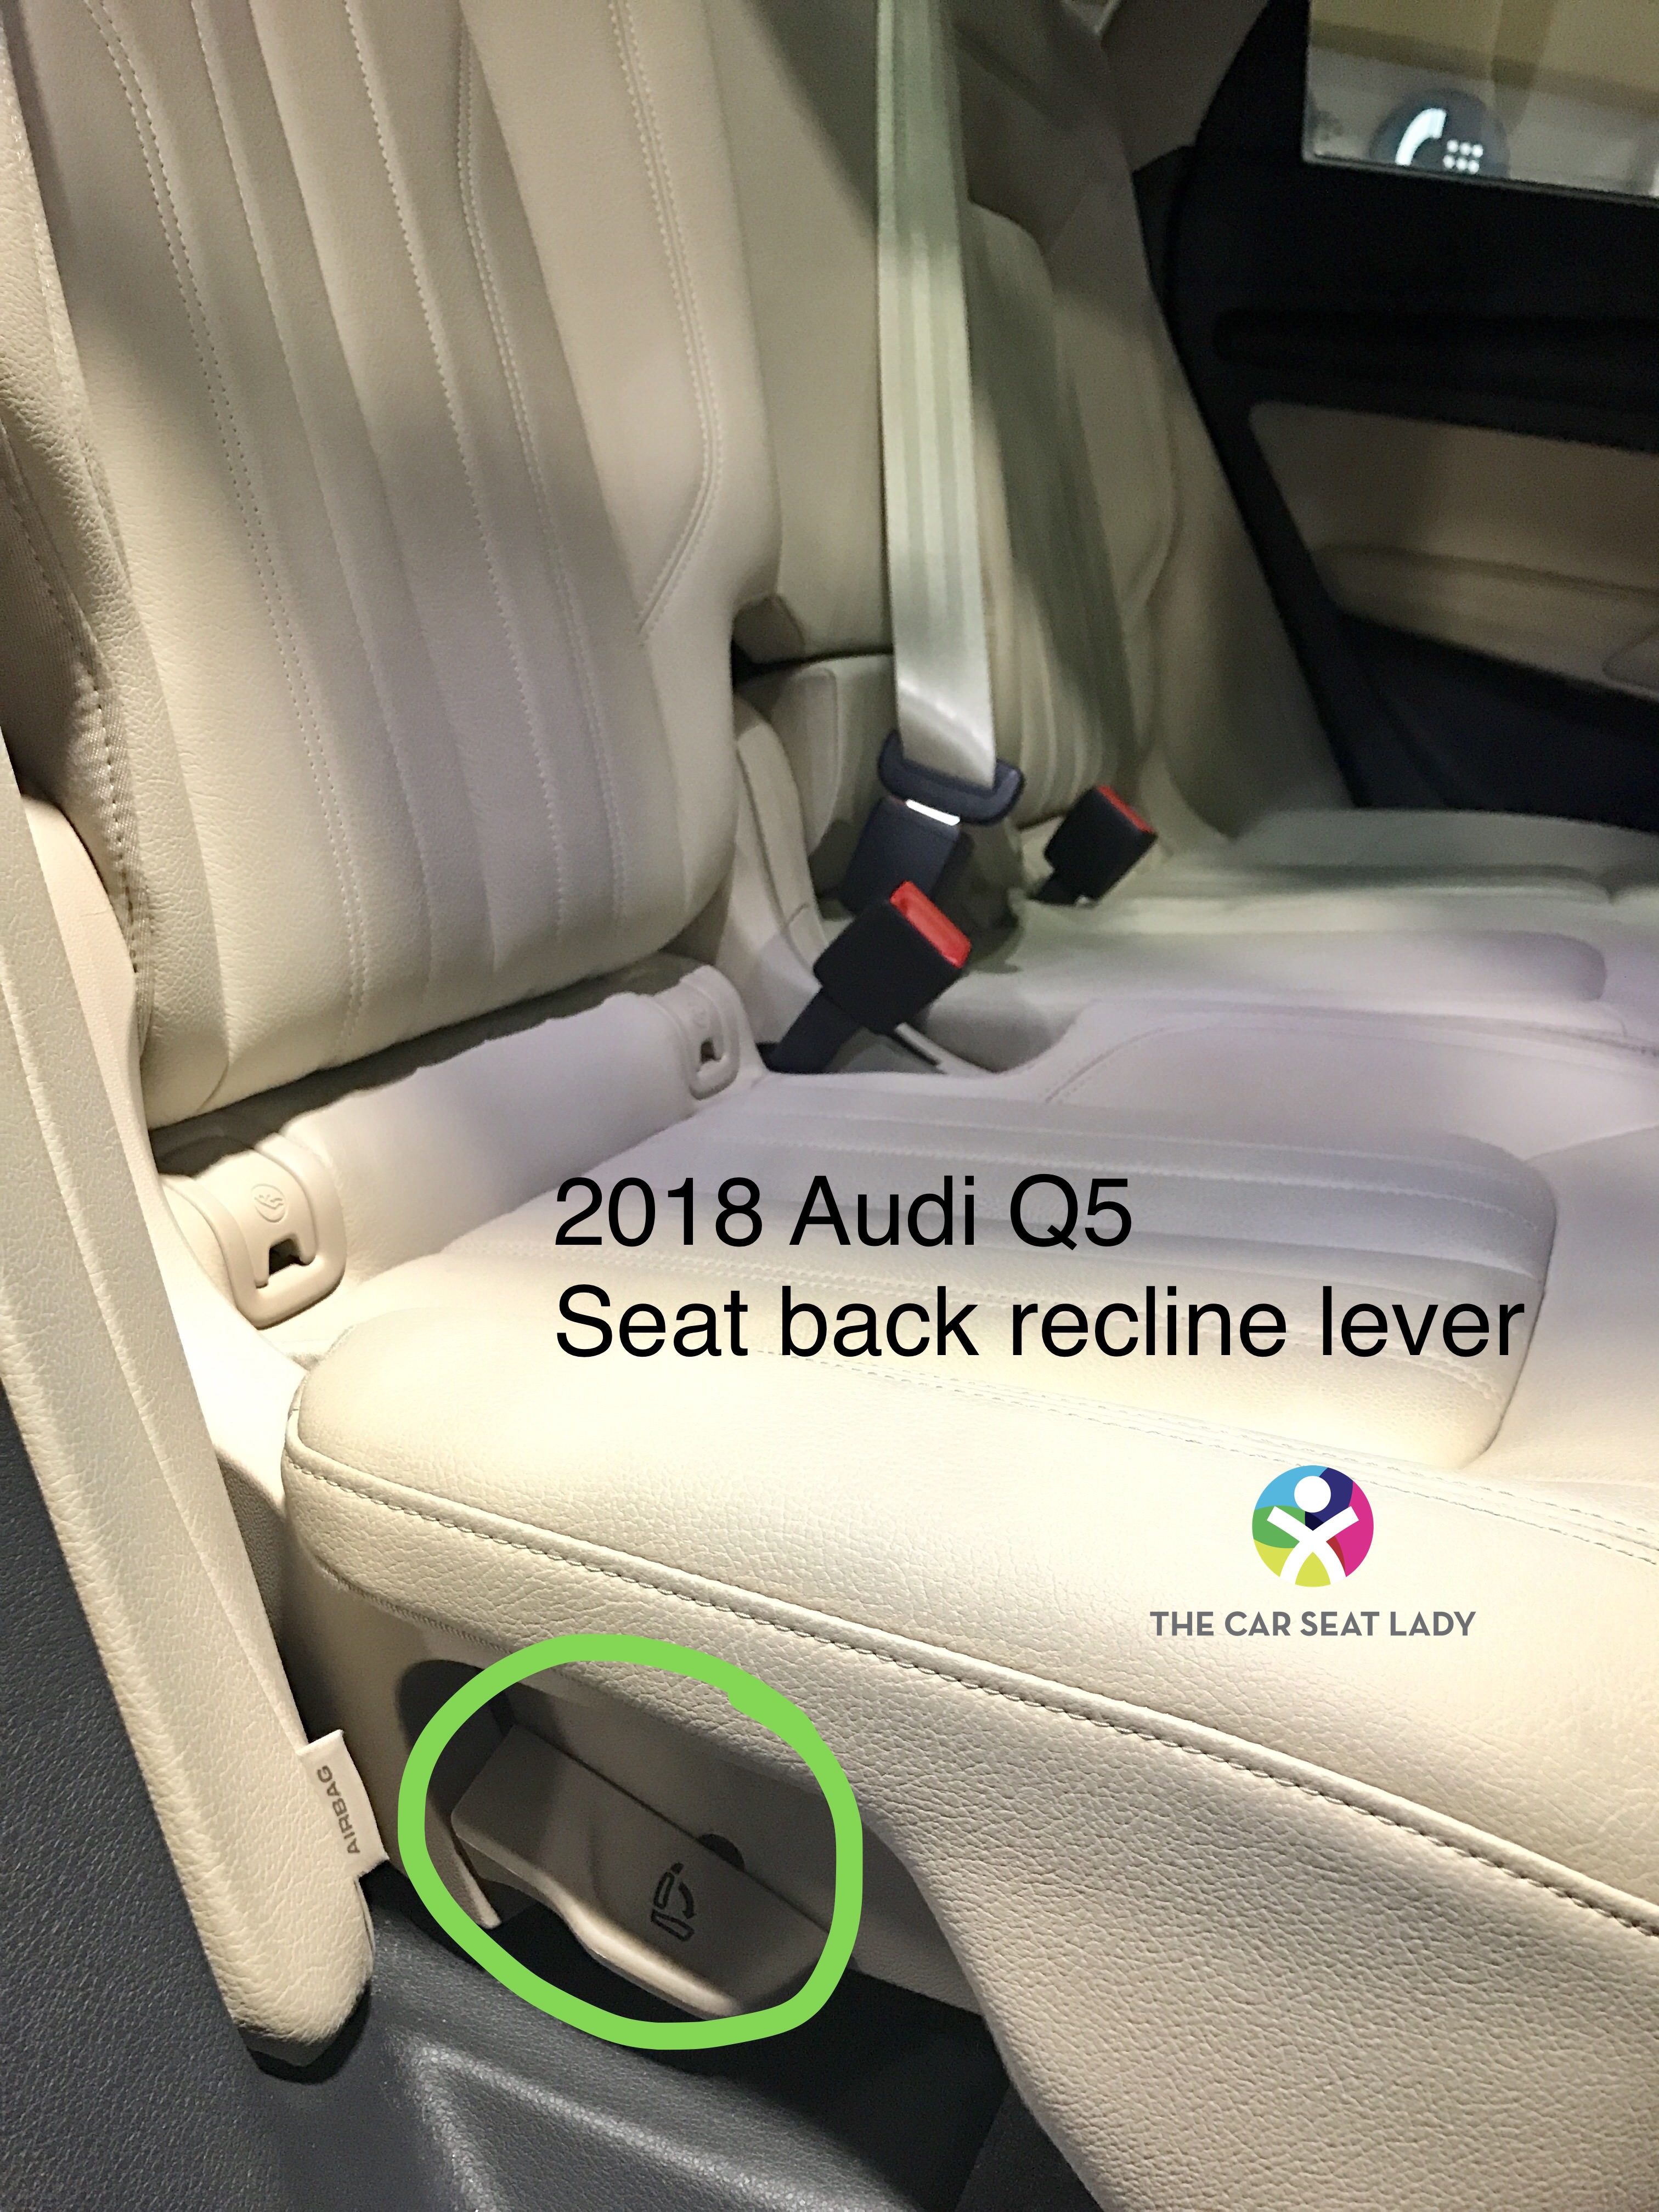 https://thecarseatlady.com/wp-content/uploads/2017/03/2018-Audi-Q5-seat-back-recline-lever.jpg